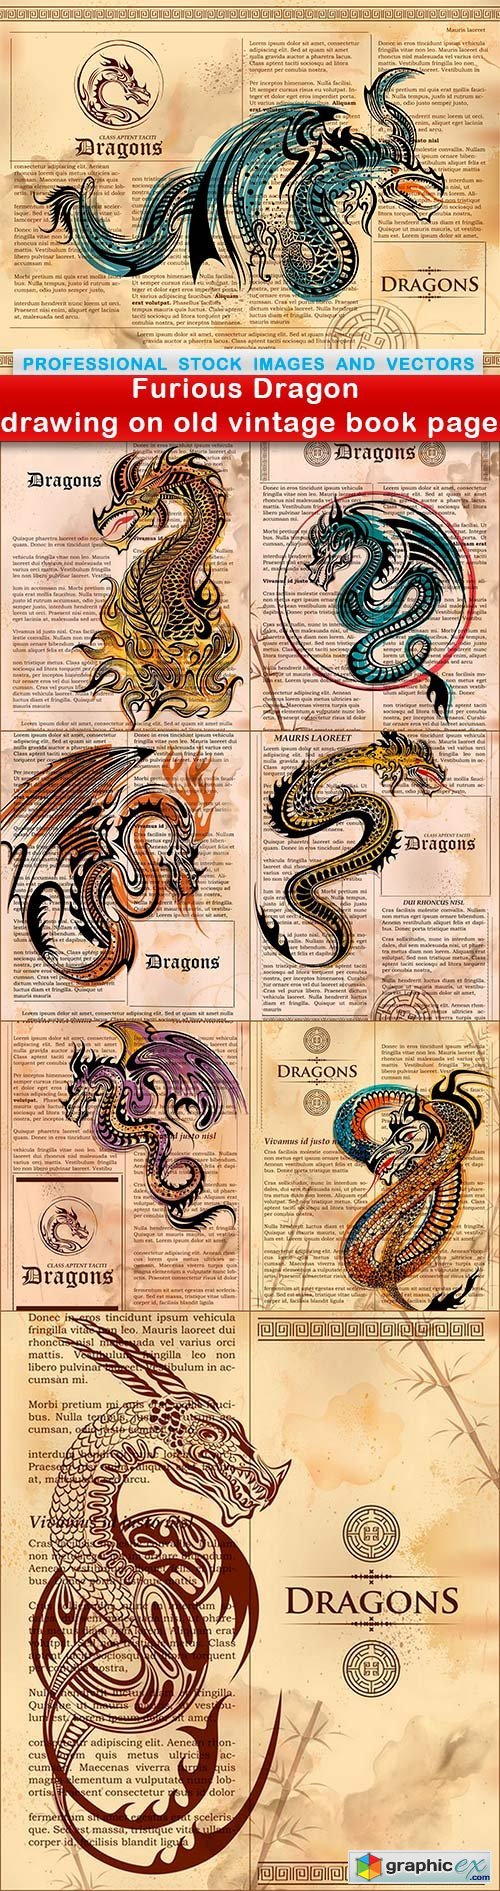 Furious Dragon drawing on old vintage book page - 8 EPS